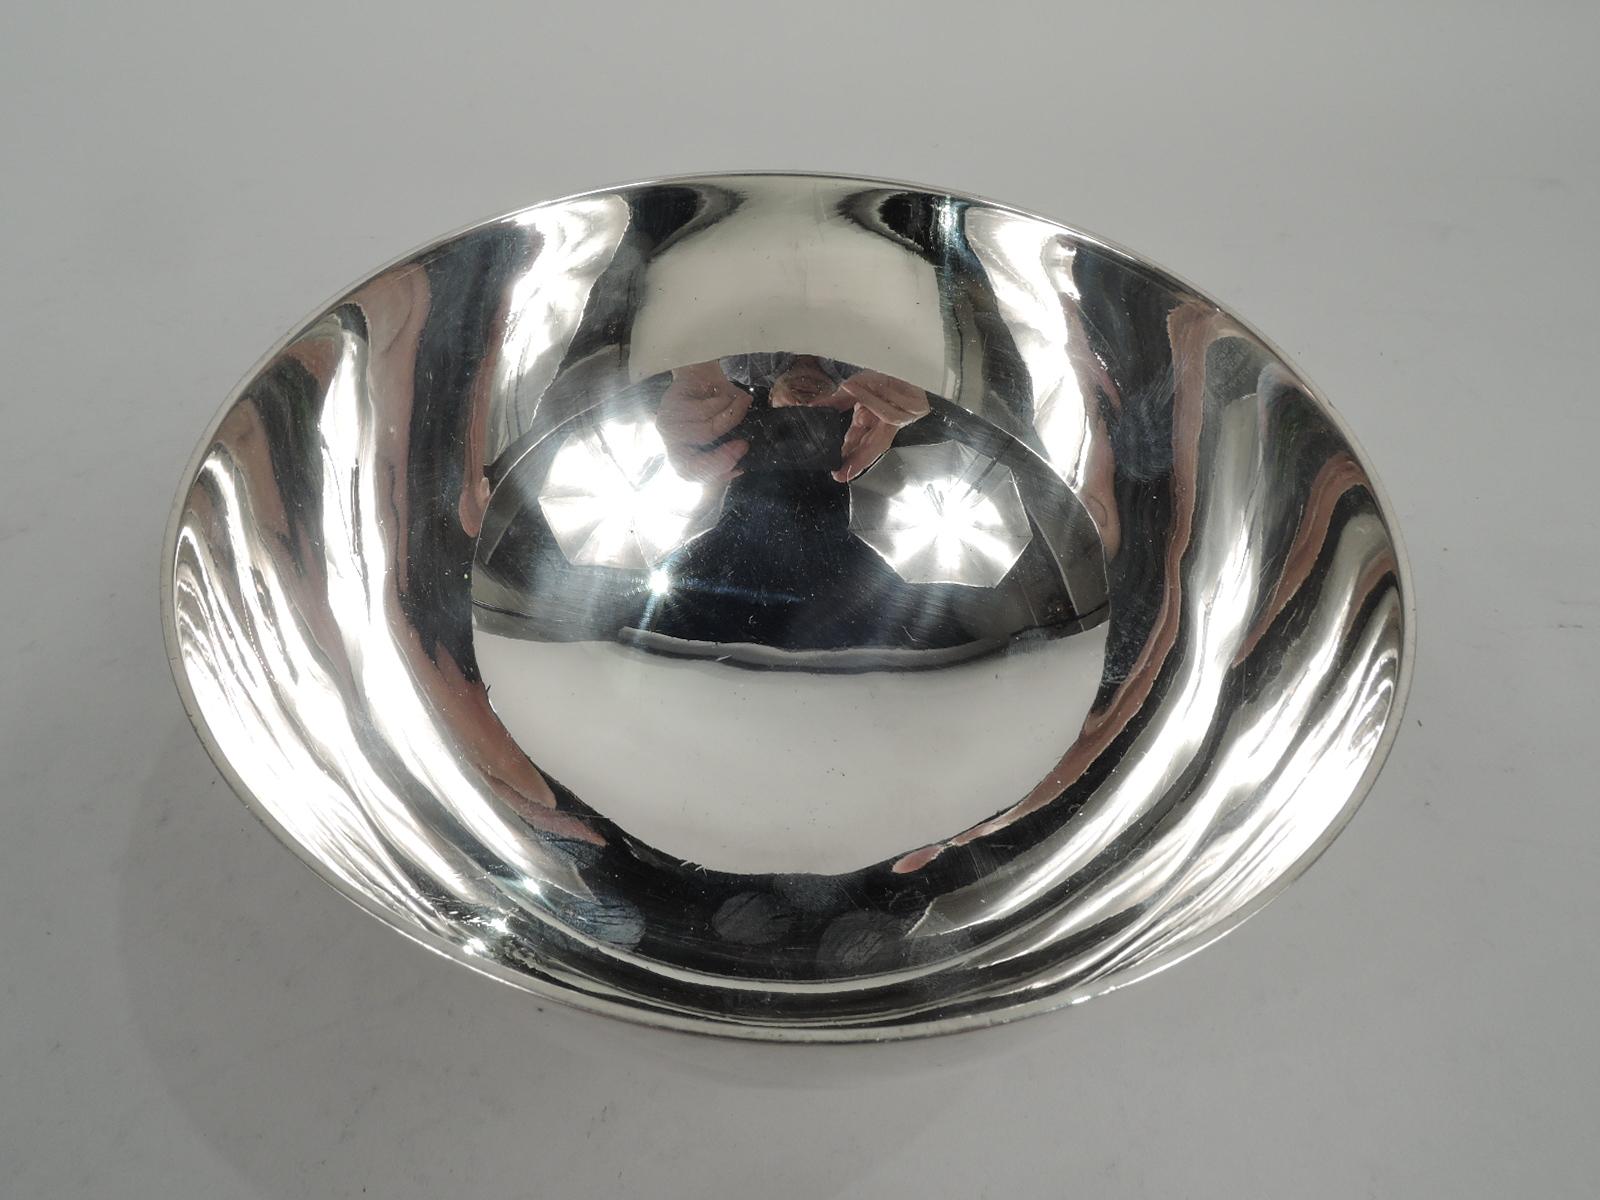 American Colonial sterling silver bowl, ca 1930. Retailed by Cartier in New York. Curved sides and short gently spread foot. Olden-Days chic for Modern and traditional tables. Fully marked including retailer’s stamp, no. 8322, and phrase